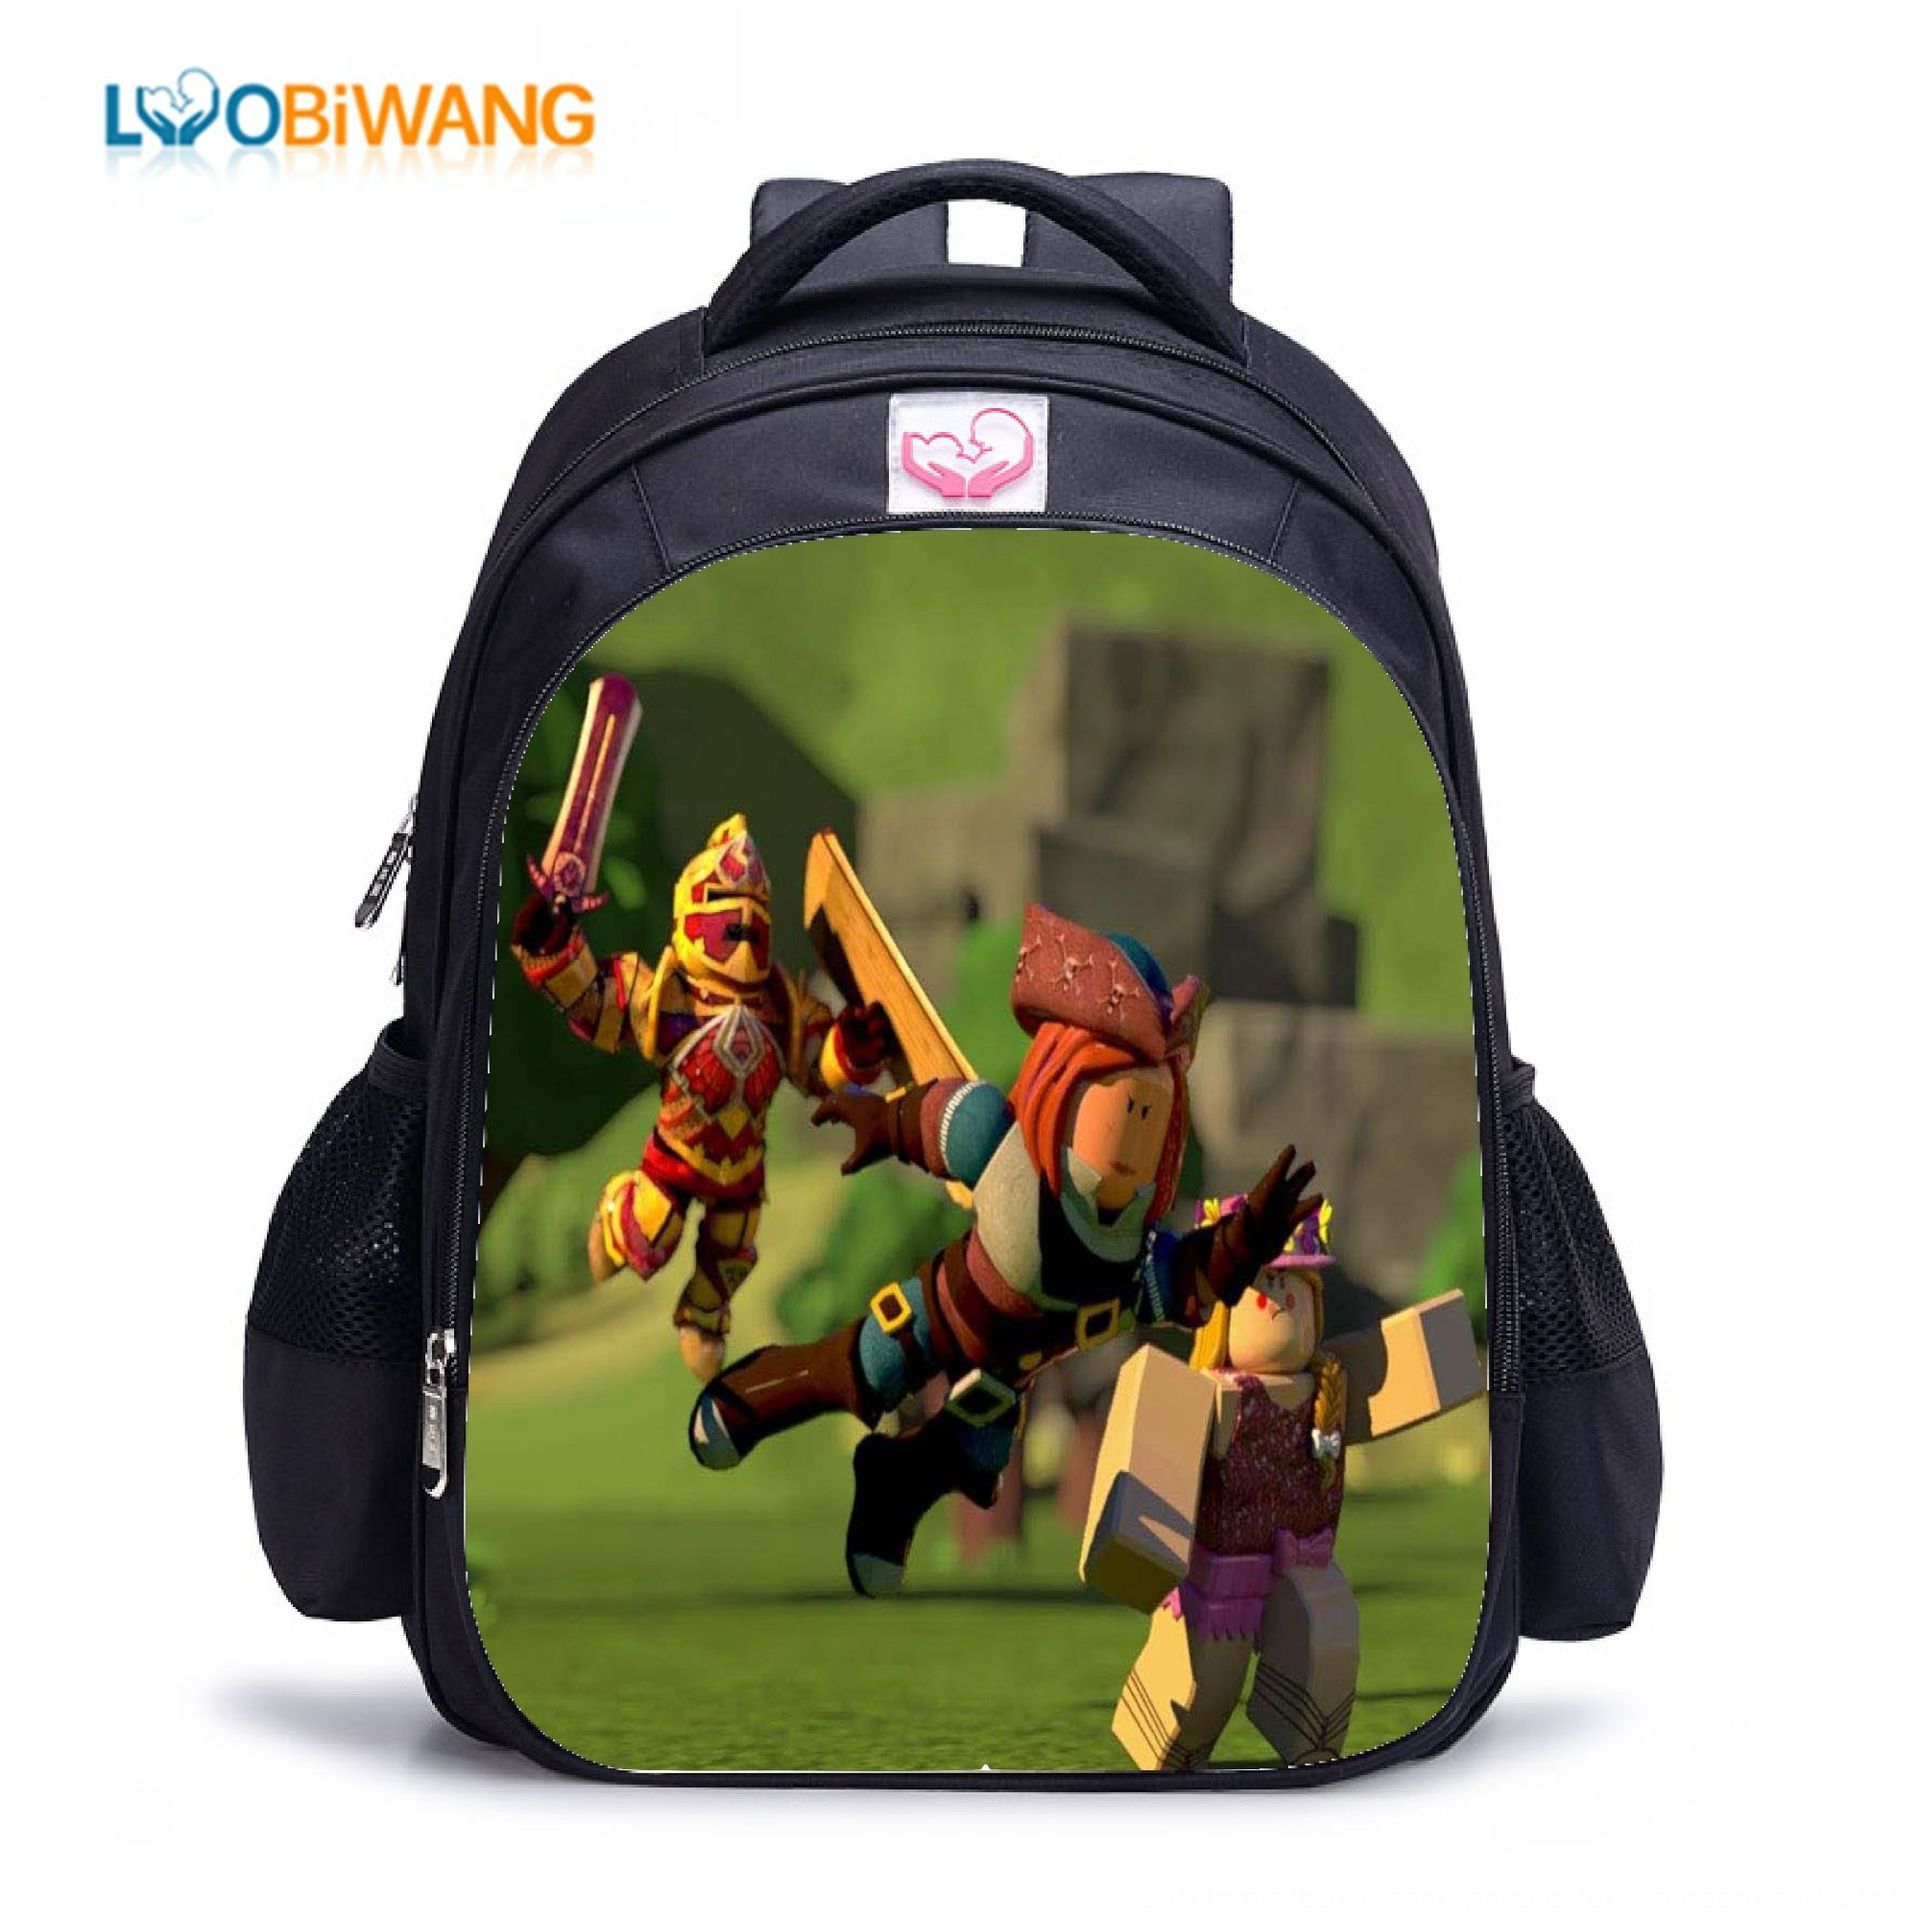 Sk1e0 Childrens Schoolbag Roblox Game Peripheral Is Looking For High Quality Merchants Childrens Schoolbag Roblox Game Peripheral Is Looki Cheap Backpacks For Teens Rucksacks And Backpacks From Gooddayitems 24 37 Dhgate Com - roblox game quality